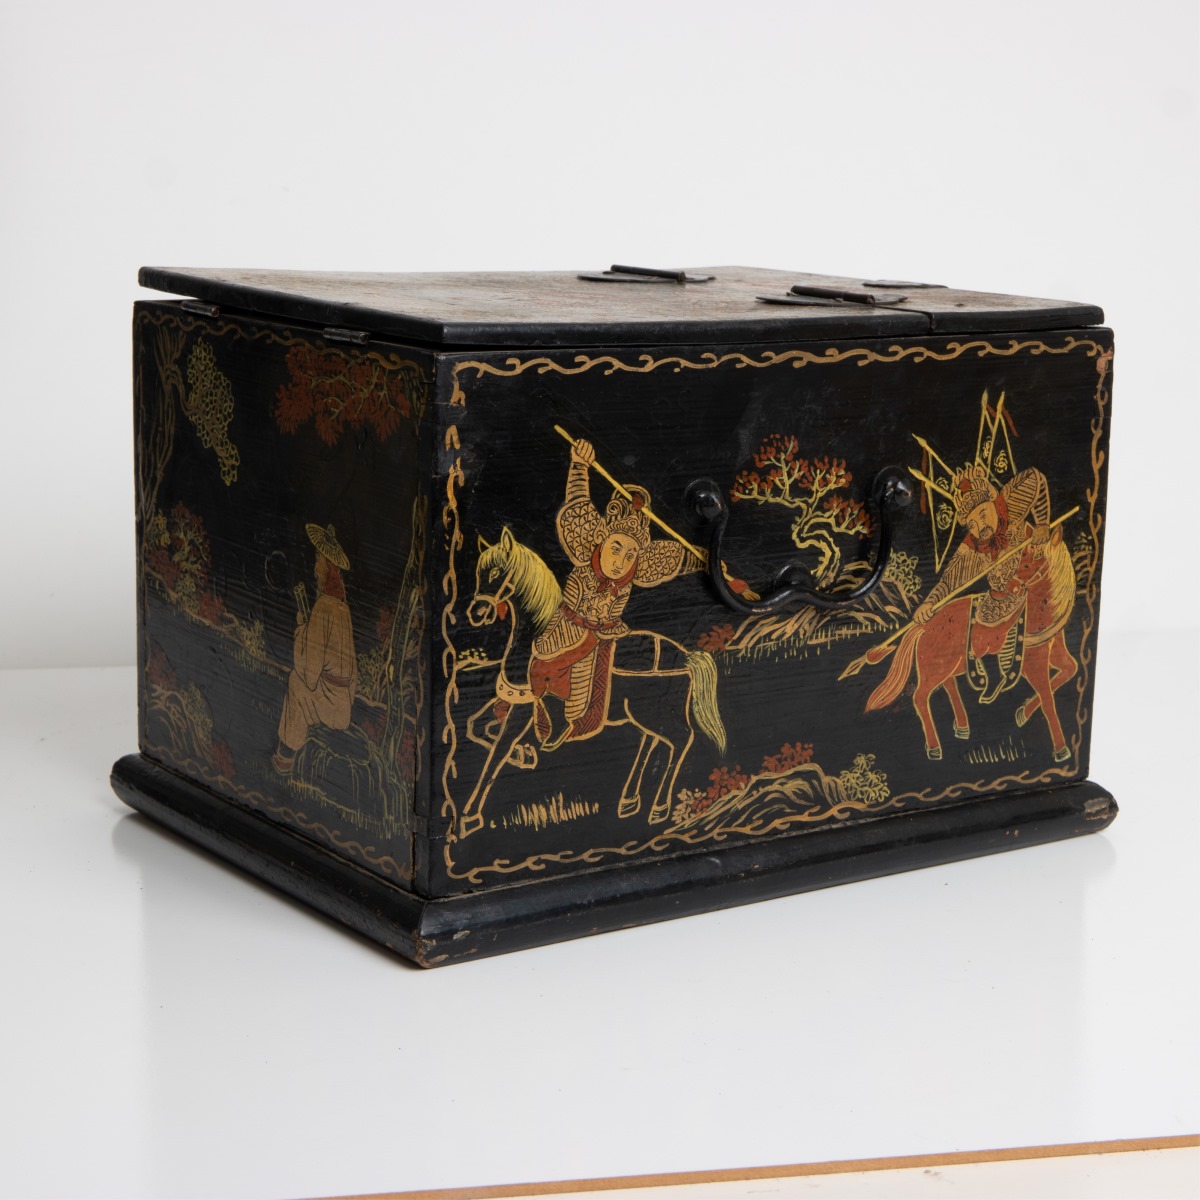 CHINESE SMALL BLACK LACQUER VANITY - Image 5 of 6